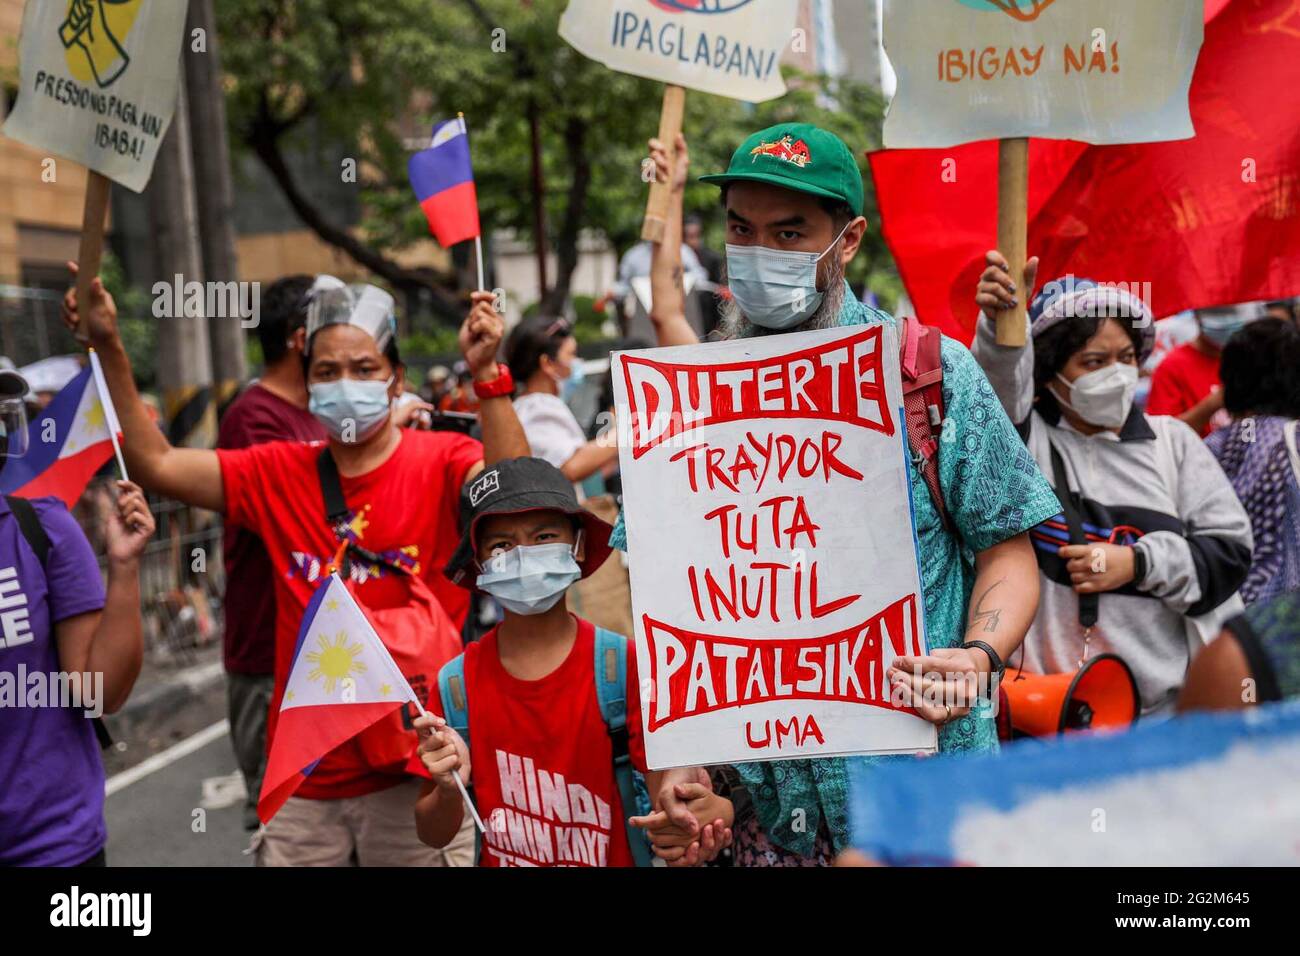 Metro Manila, Philippines. 12th June 2021. Activists shout slogans during a protest in front of the Chinese consulate marking Independence Day in the financial district of Makati. Various groups called on China to stop its maritime activities in the disputed South China Sea, which endangers peace and stability in the region. Credit: Majority World CIC/Alamy Live News Stock Photo